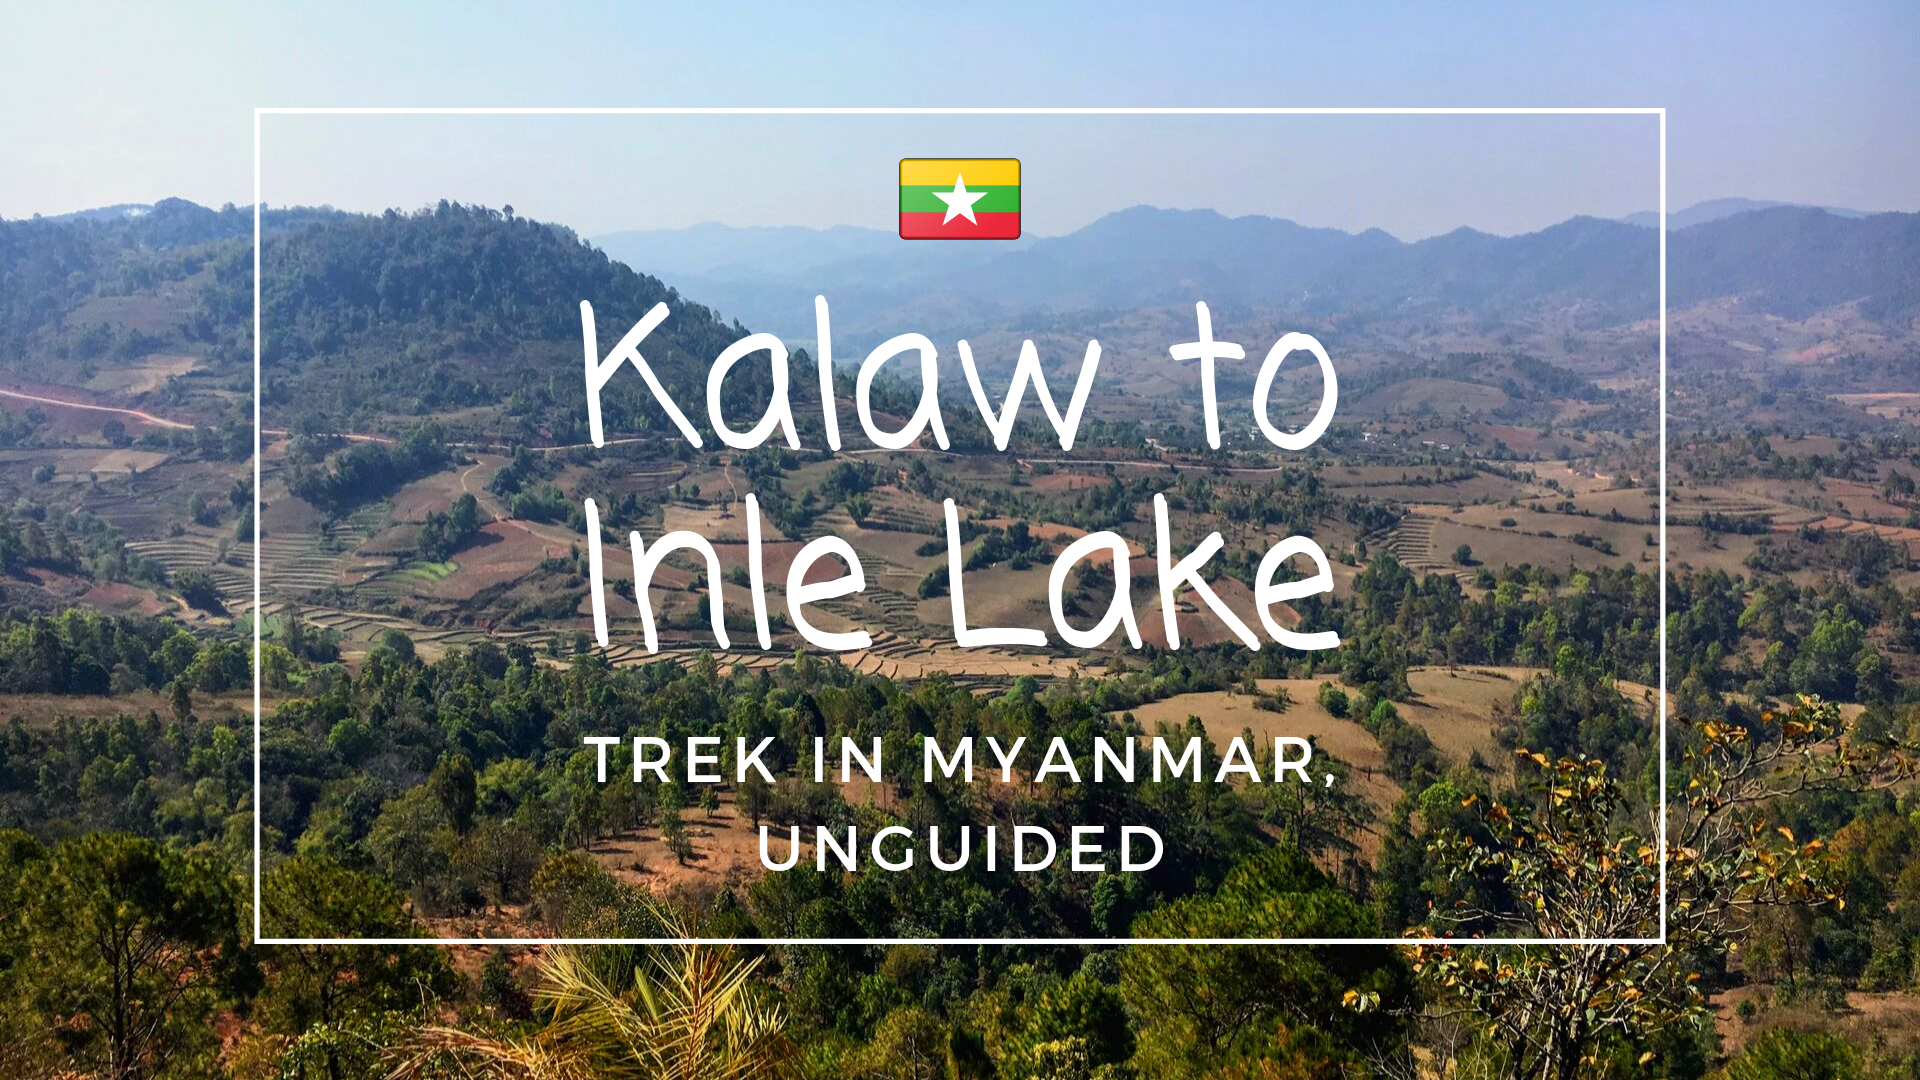 Kalaw to Inle Lake trek in Myanmar unguided cover